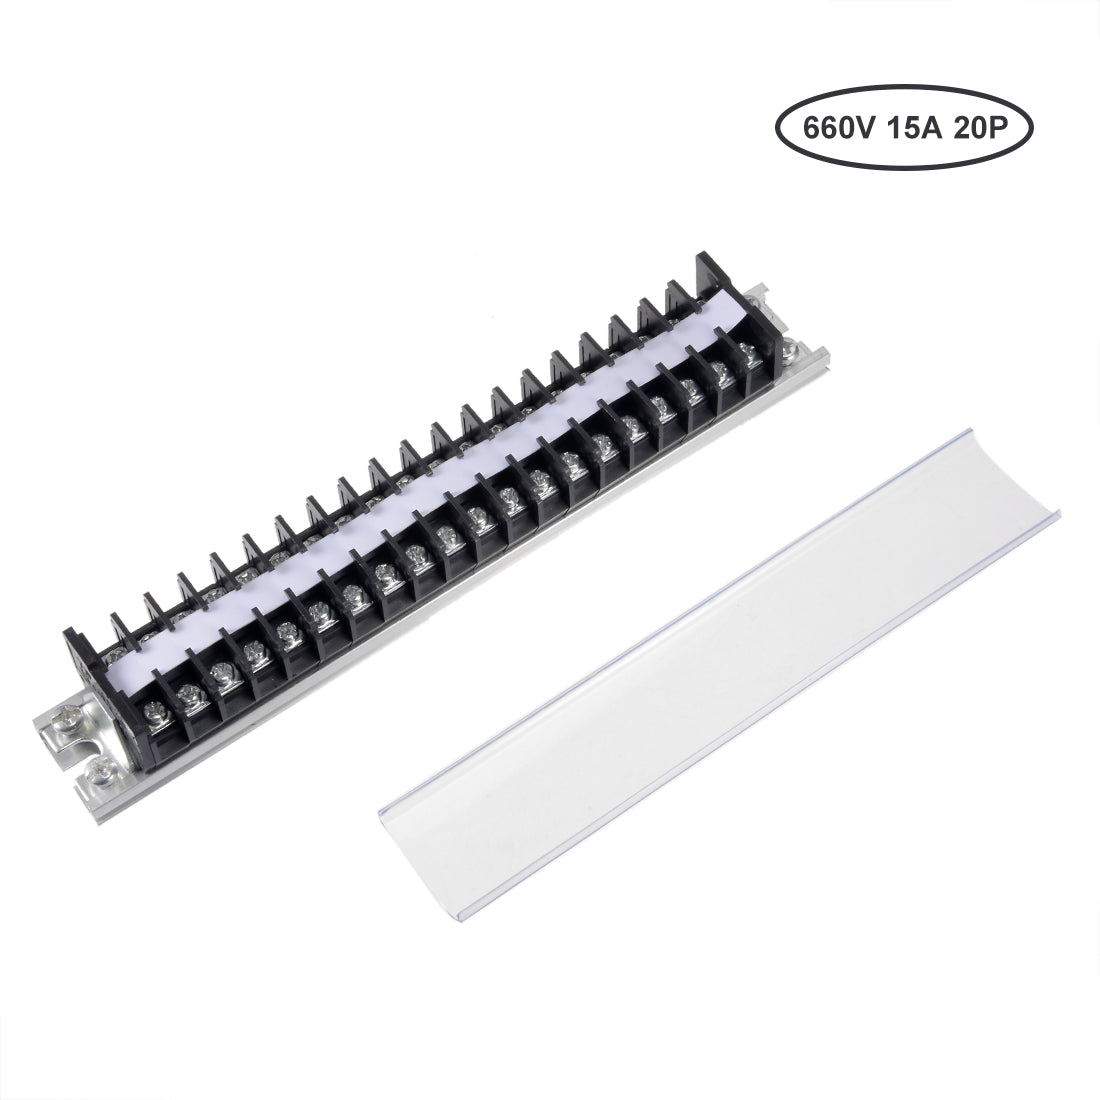 uxcell Uxcell Barrier Terminal Strip Block 660V 15A Dual Rows 20P DIN Rail Base Covered Connector